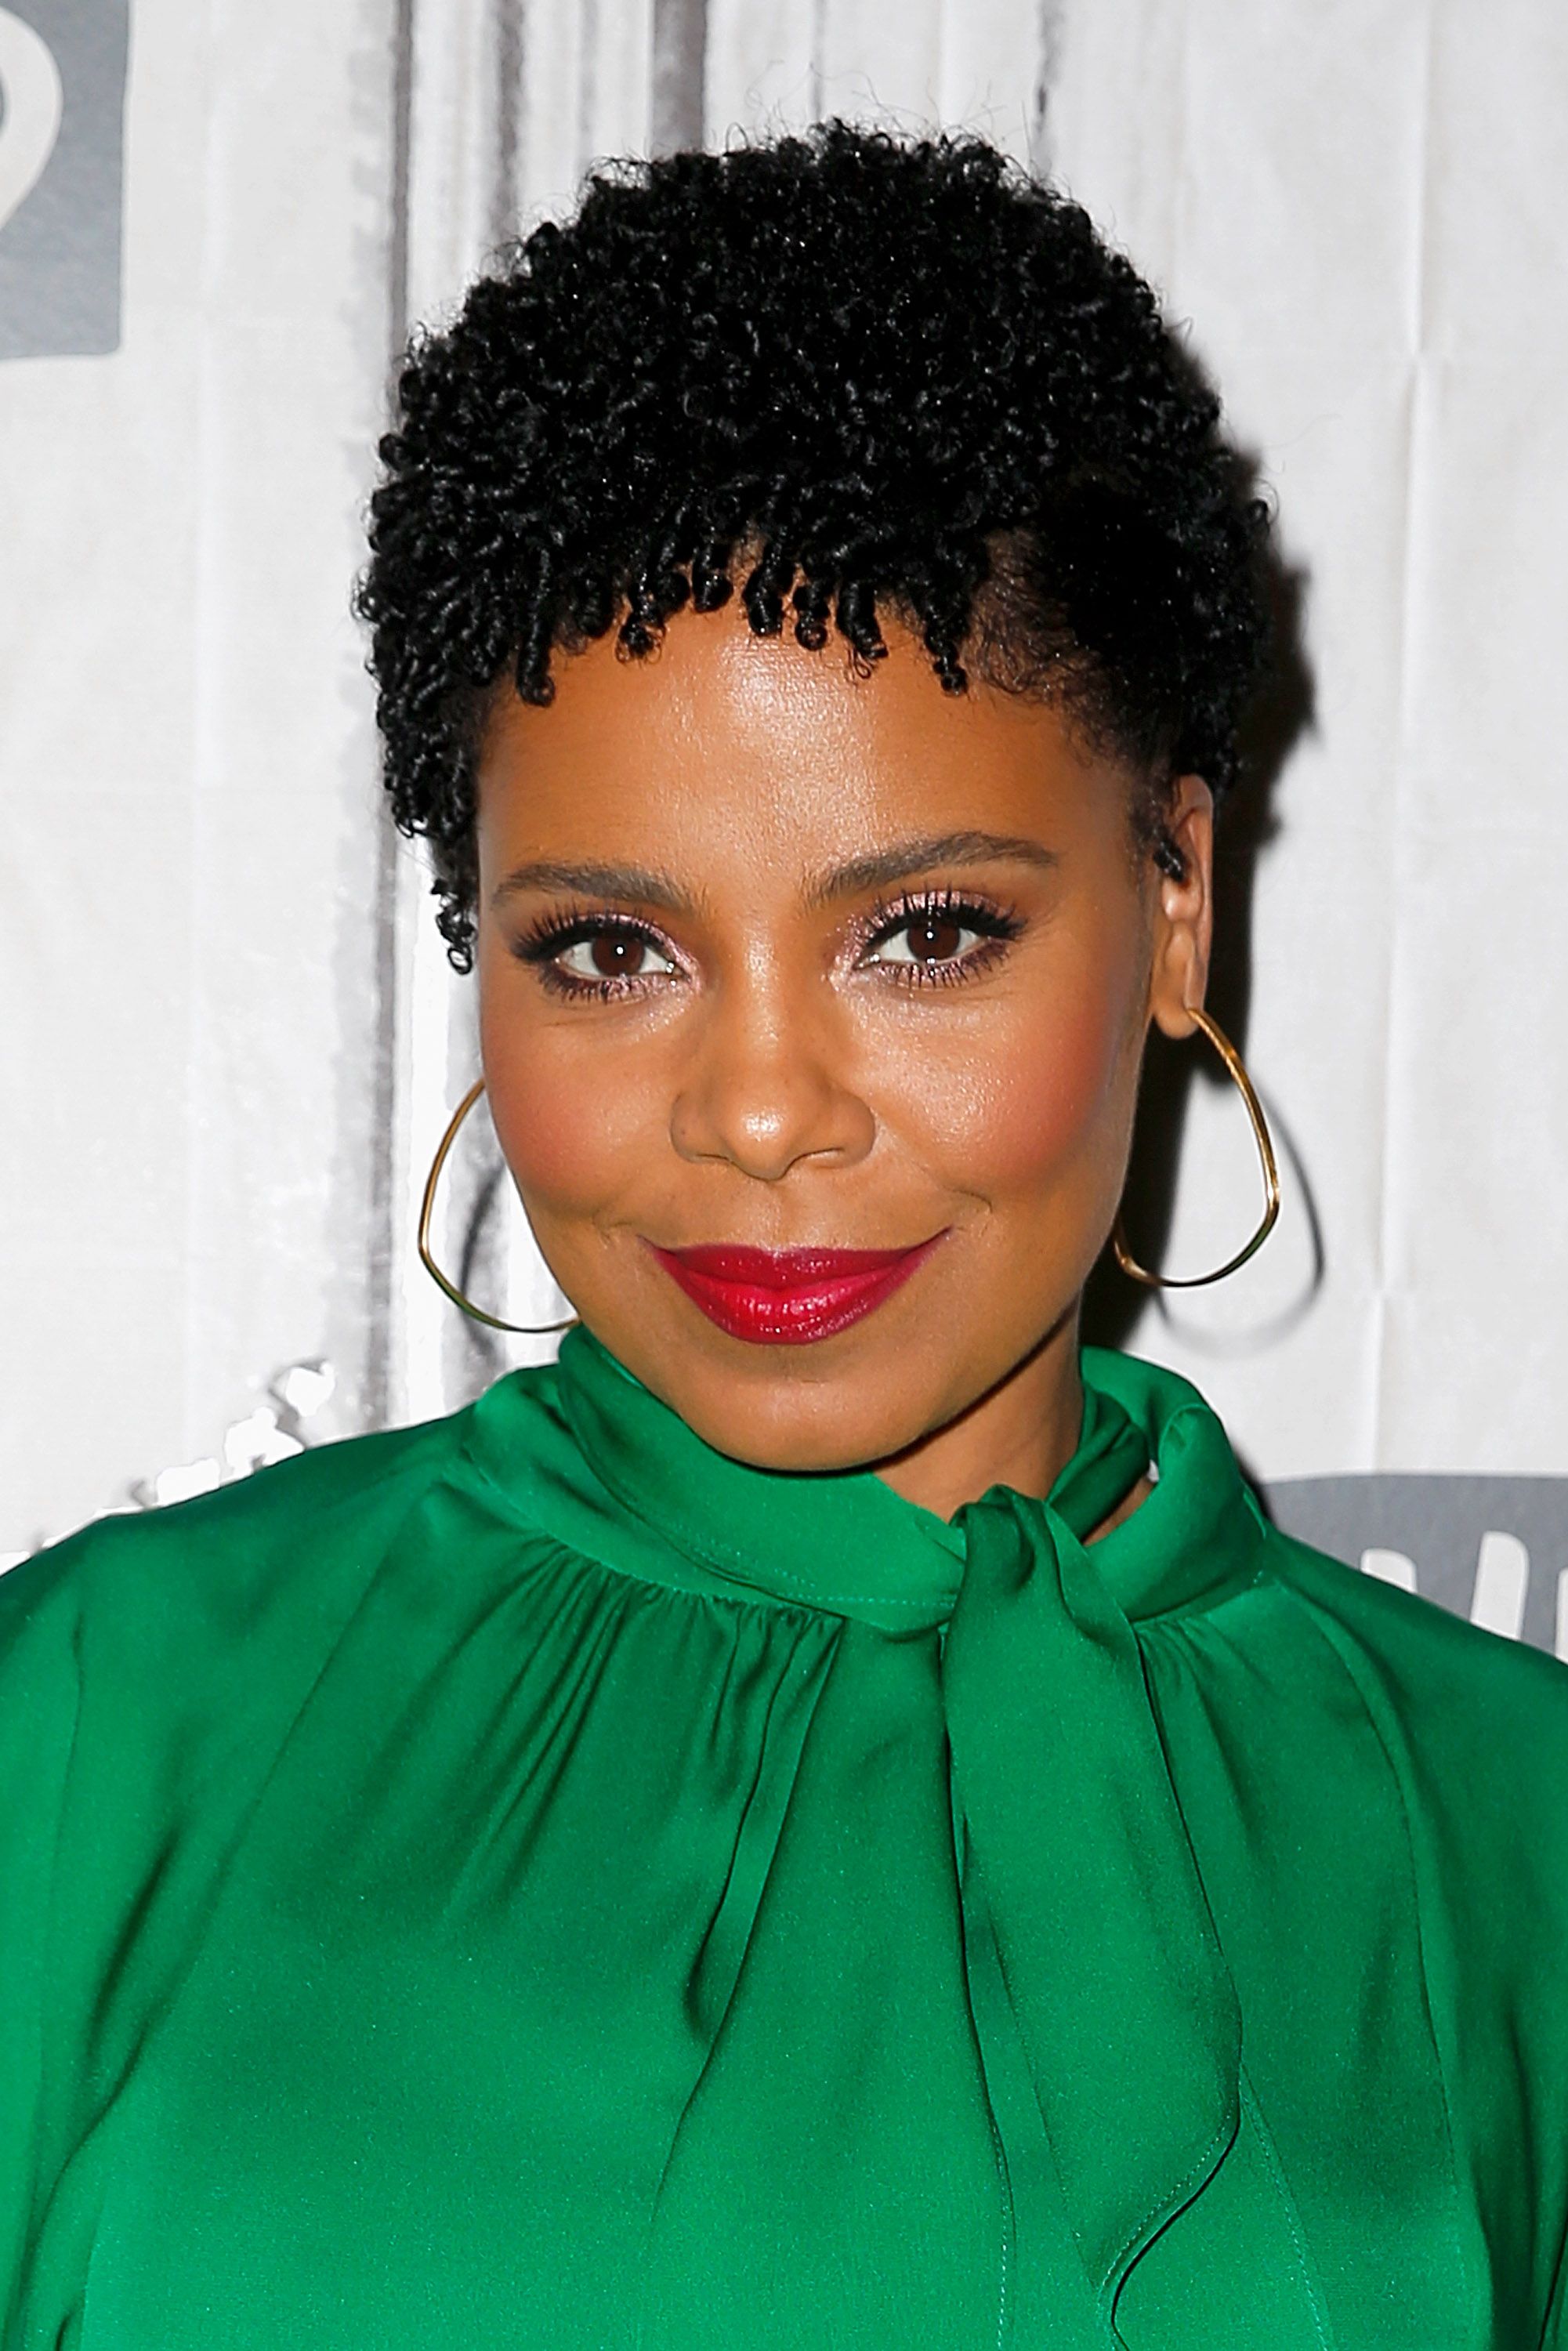 20 Natural Hairstyles to Wear at a Wedding